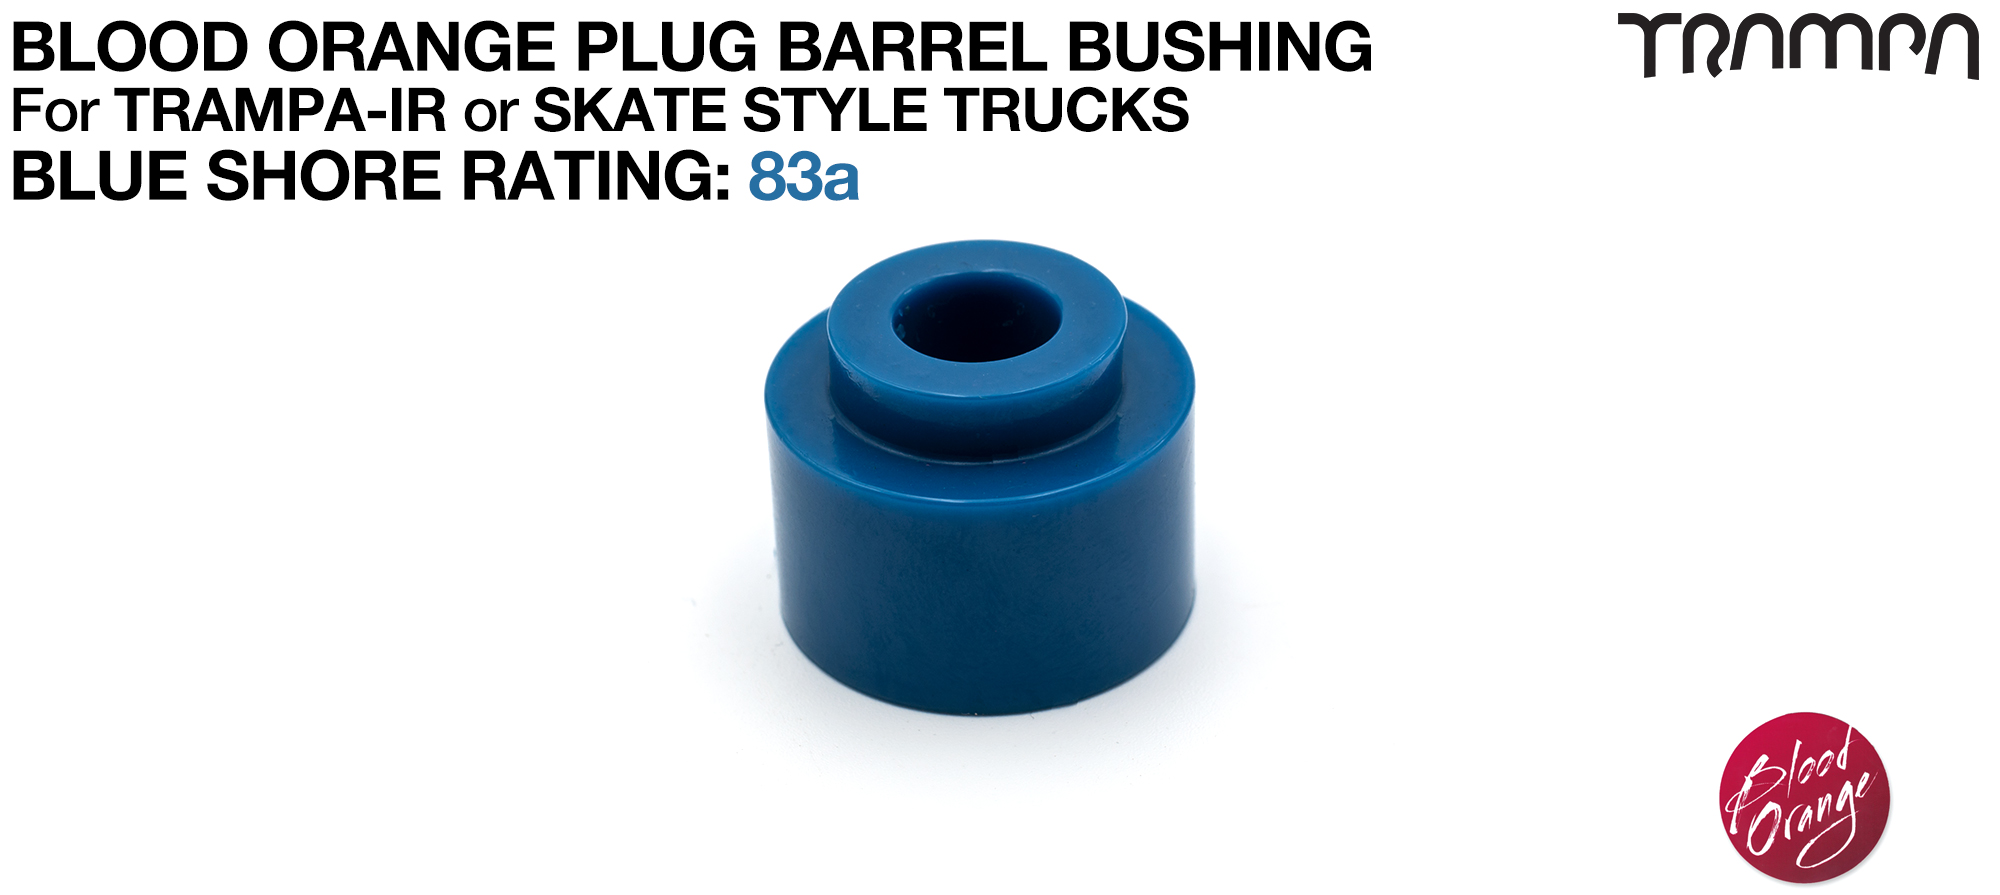 PLUG Bushing - GREY 98a - OUT OF STOCK